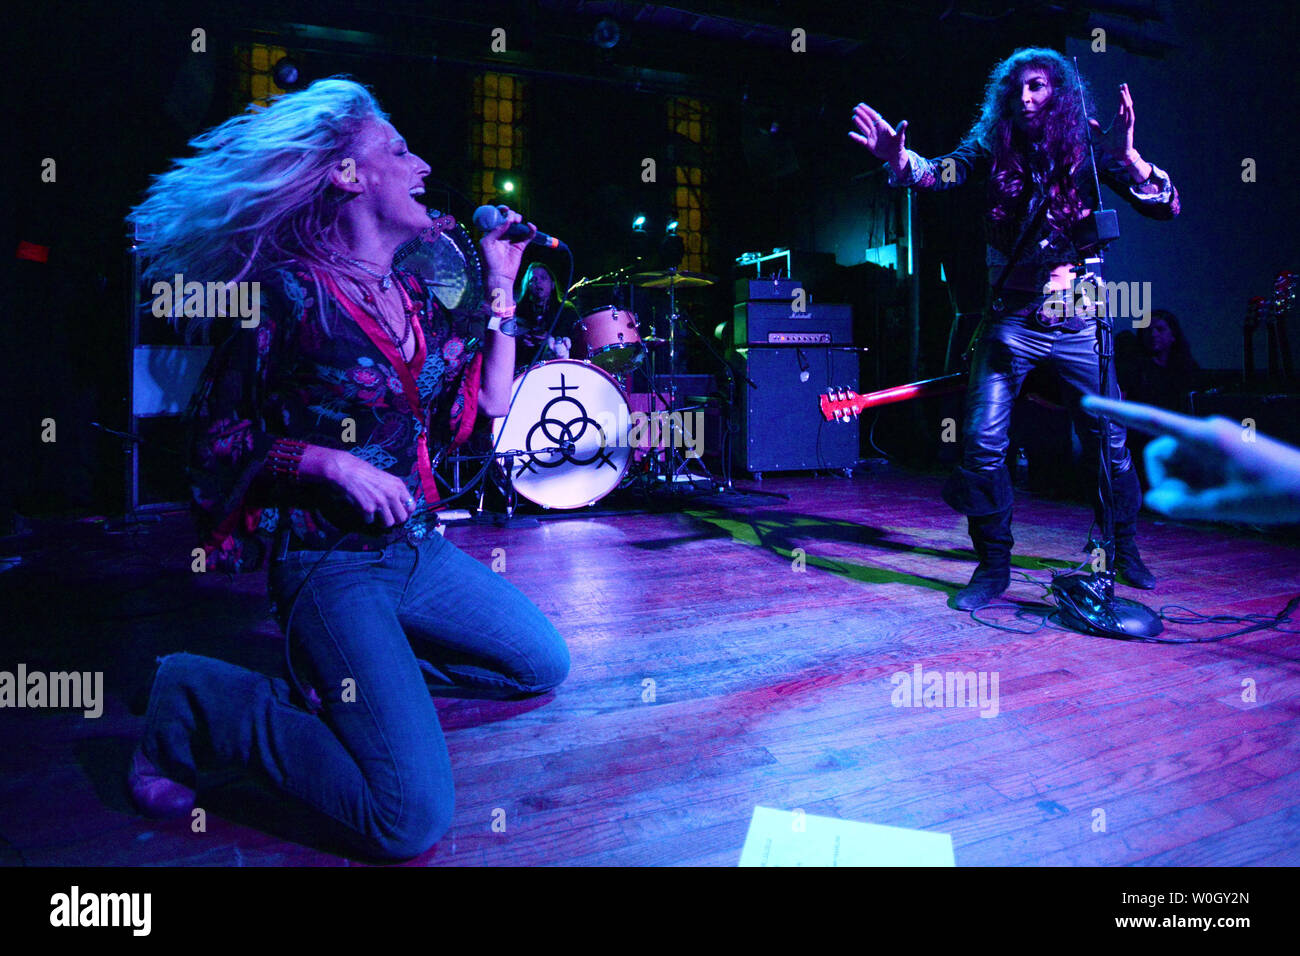 Lead singer Shannon Conley belts out the Led Zeppelin tune 'Whole Lotta Love' assisted by lead guitarist Steph Paynes (R) and drummer Leesa Harrington-Squyres during a performance by the all-girl Lez Zeppelin band at the Altar Bar, a converted church, in Pittsburgh, Pennsylvania on November 10, 2012.  The Led Zeppelin movie 'Celebration Day' is released on Blu-ray and other home formats on November 19, 2012, while their live music lives on with popular groups like Lez Zeppelin in bars and theaters across America.  Not seen is Megan Thomas.   UPI/Pat Benic Stock Photo